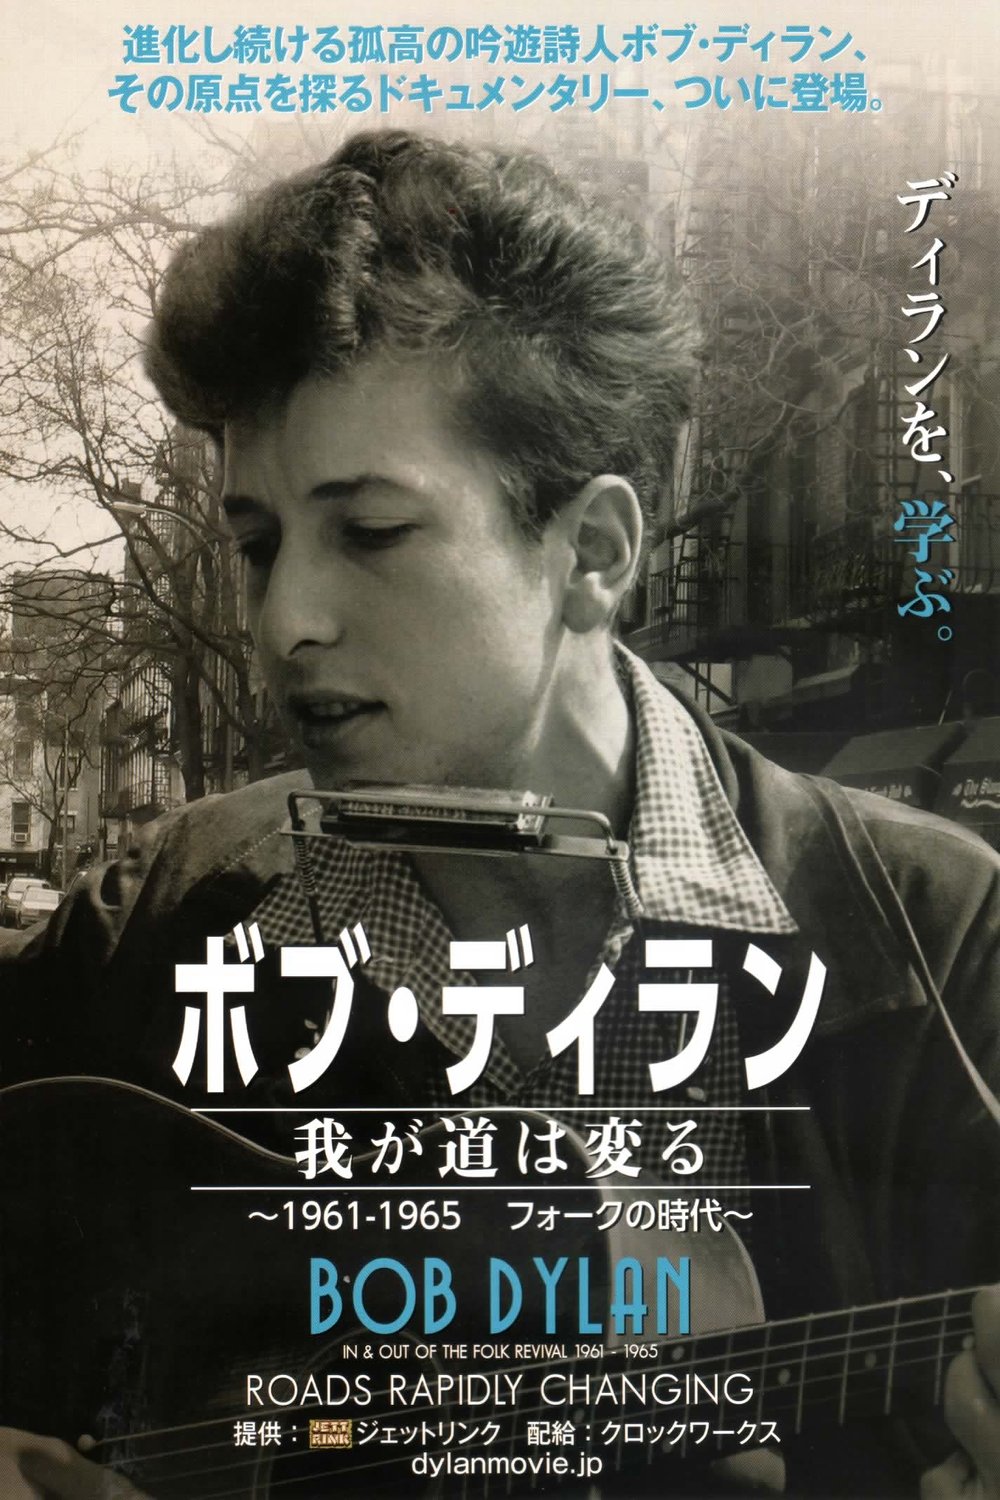 Poster of the movie Bob Dylan: Roads Rapidly Changing - In & Out of the Folk Revival 1961 - 1965